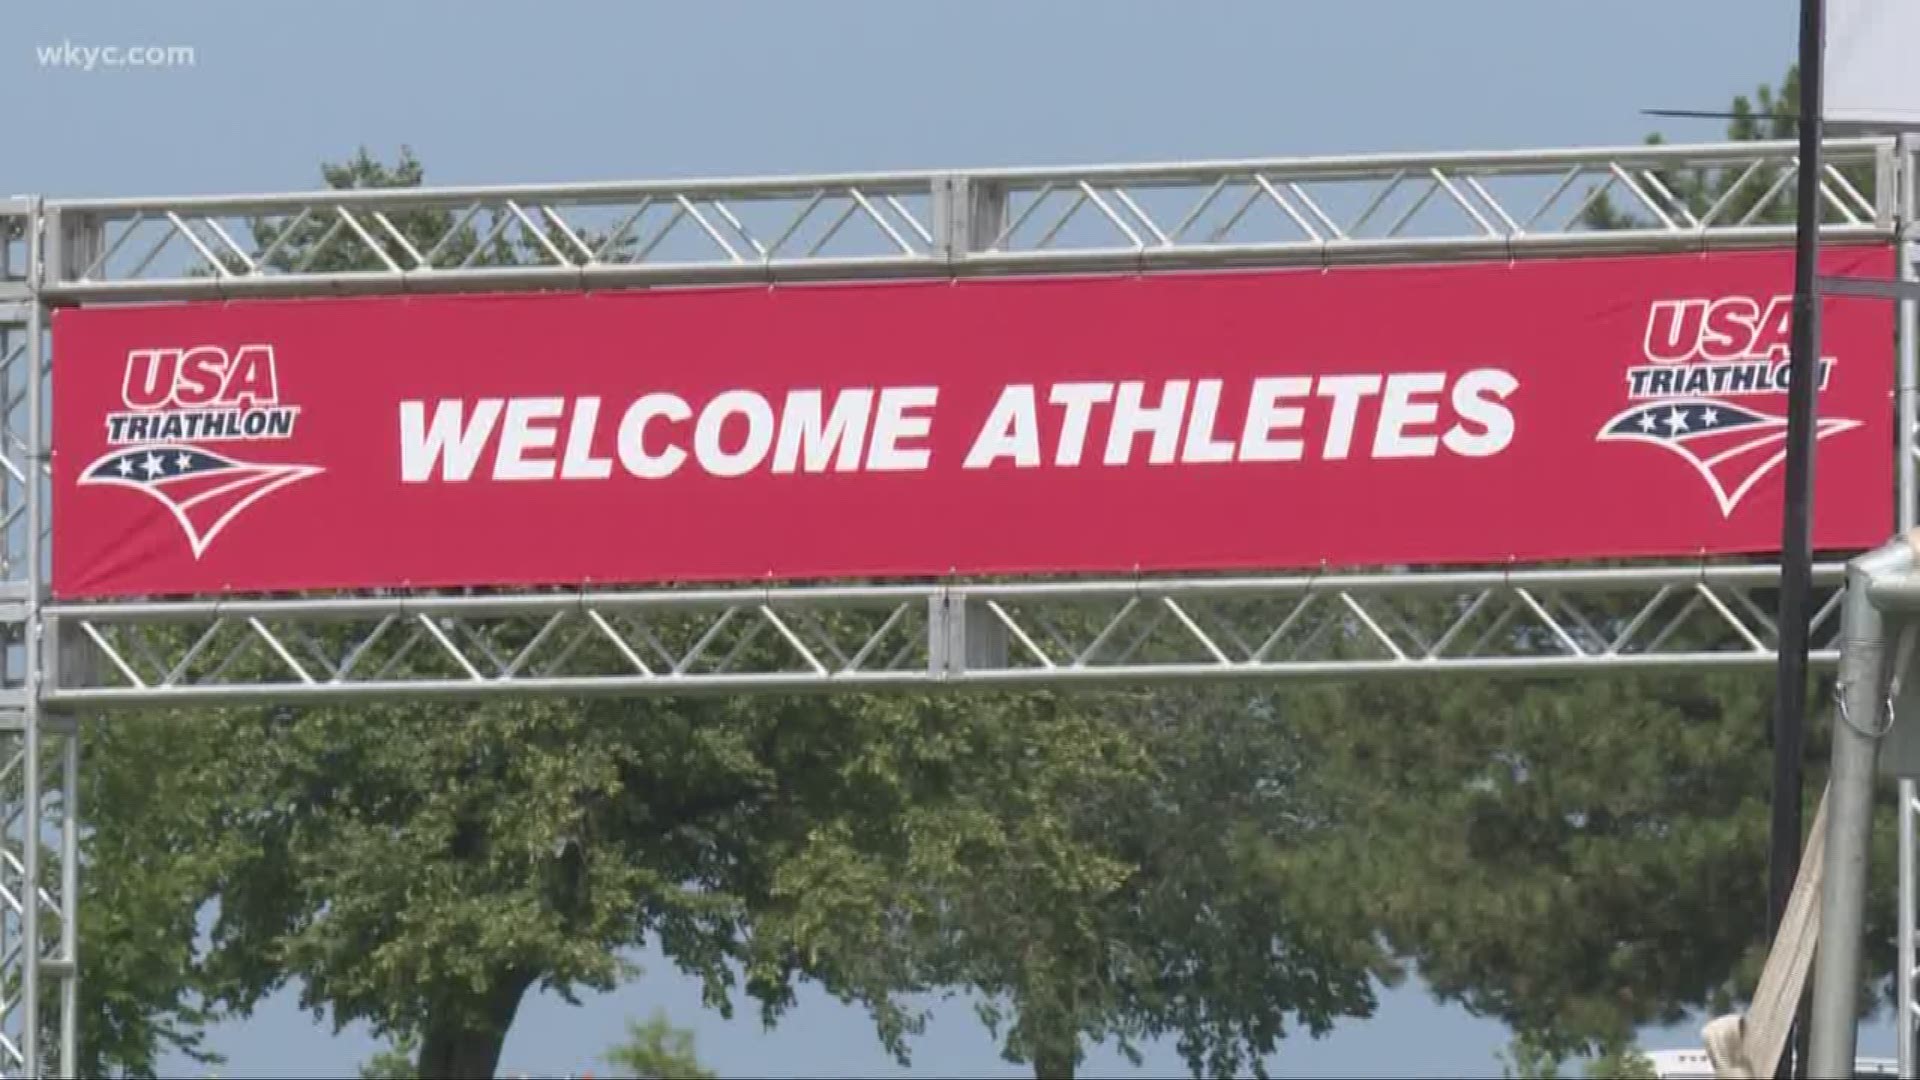 USA Triathlon set to begin Saturday after week of water quality concerns